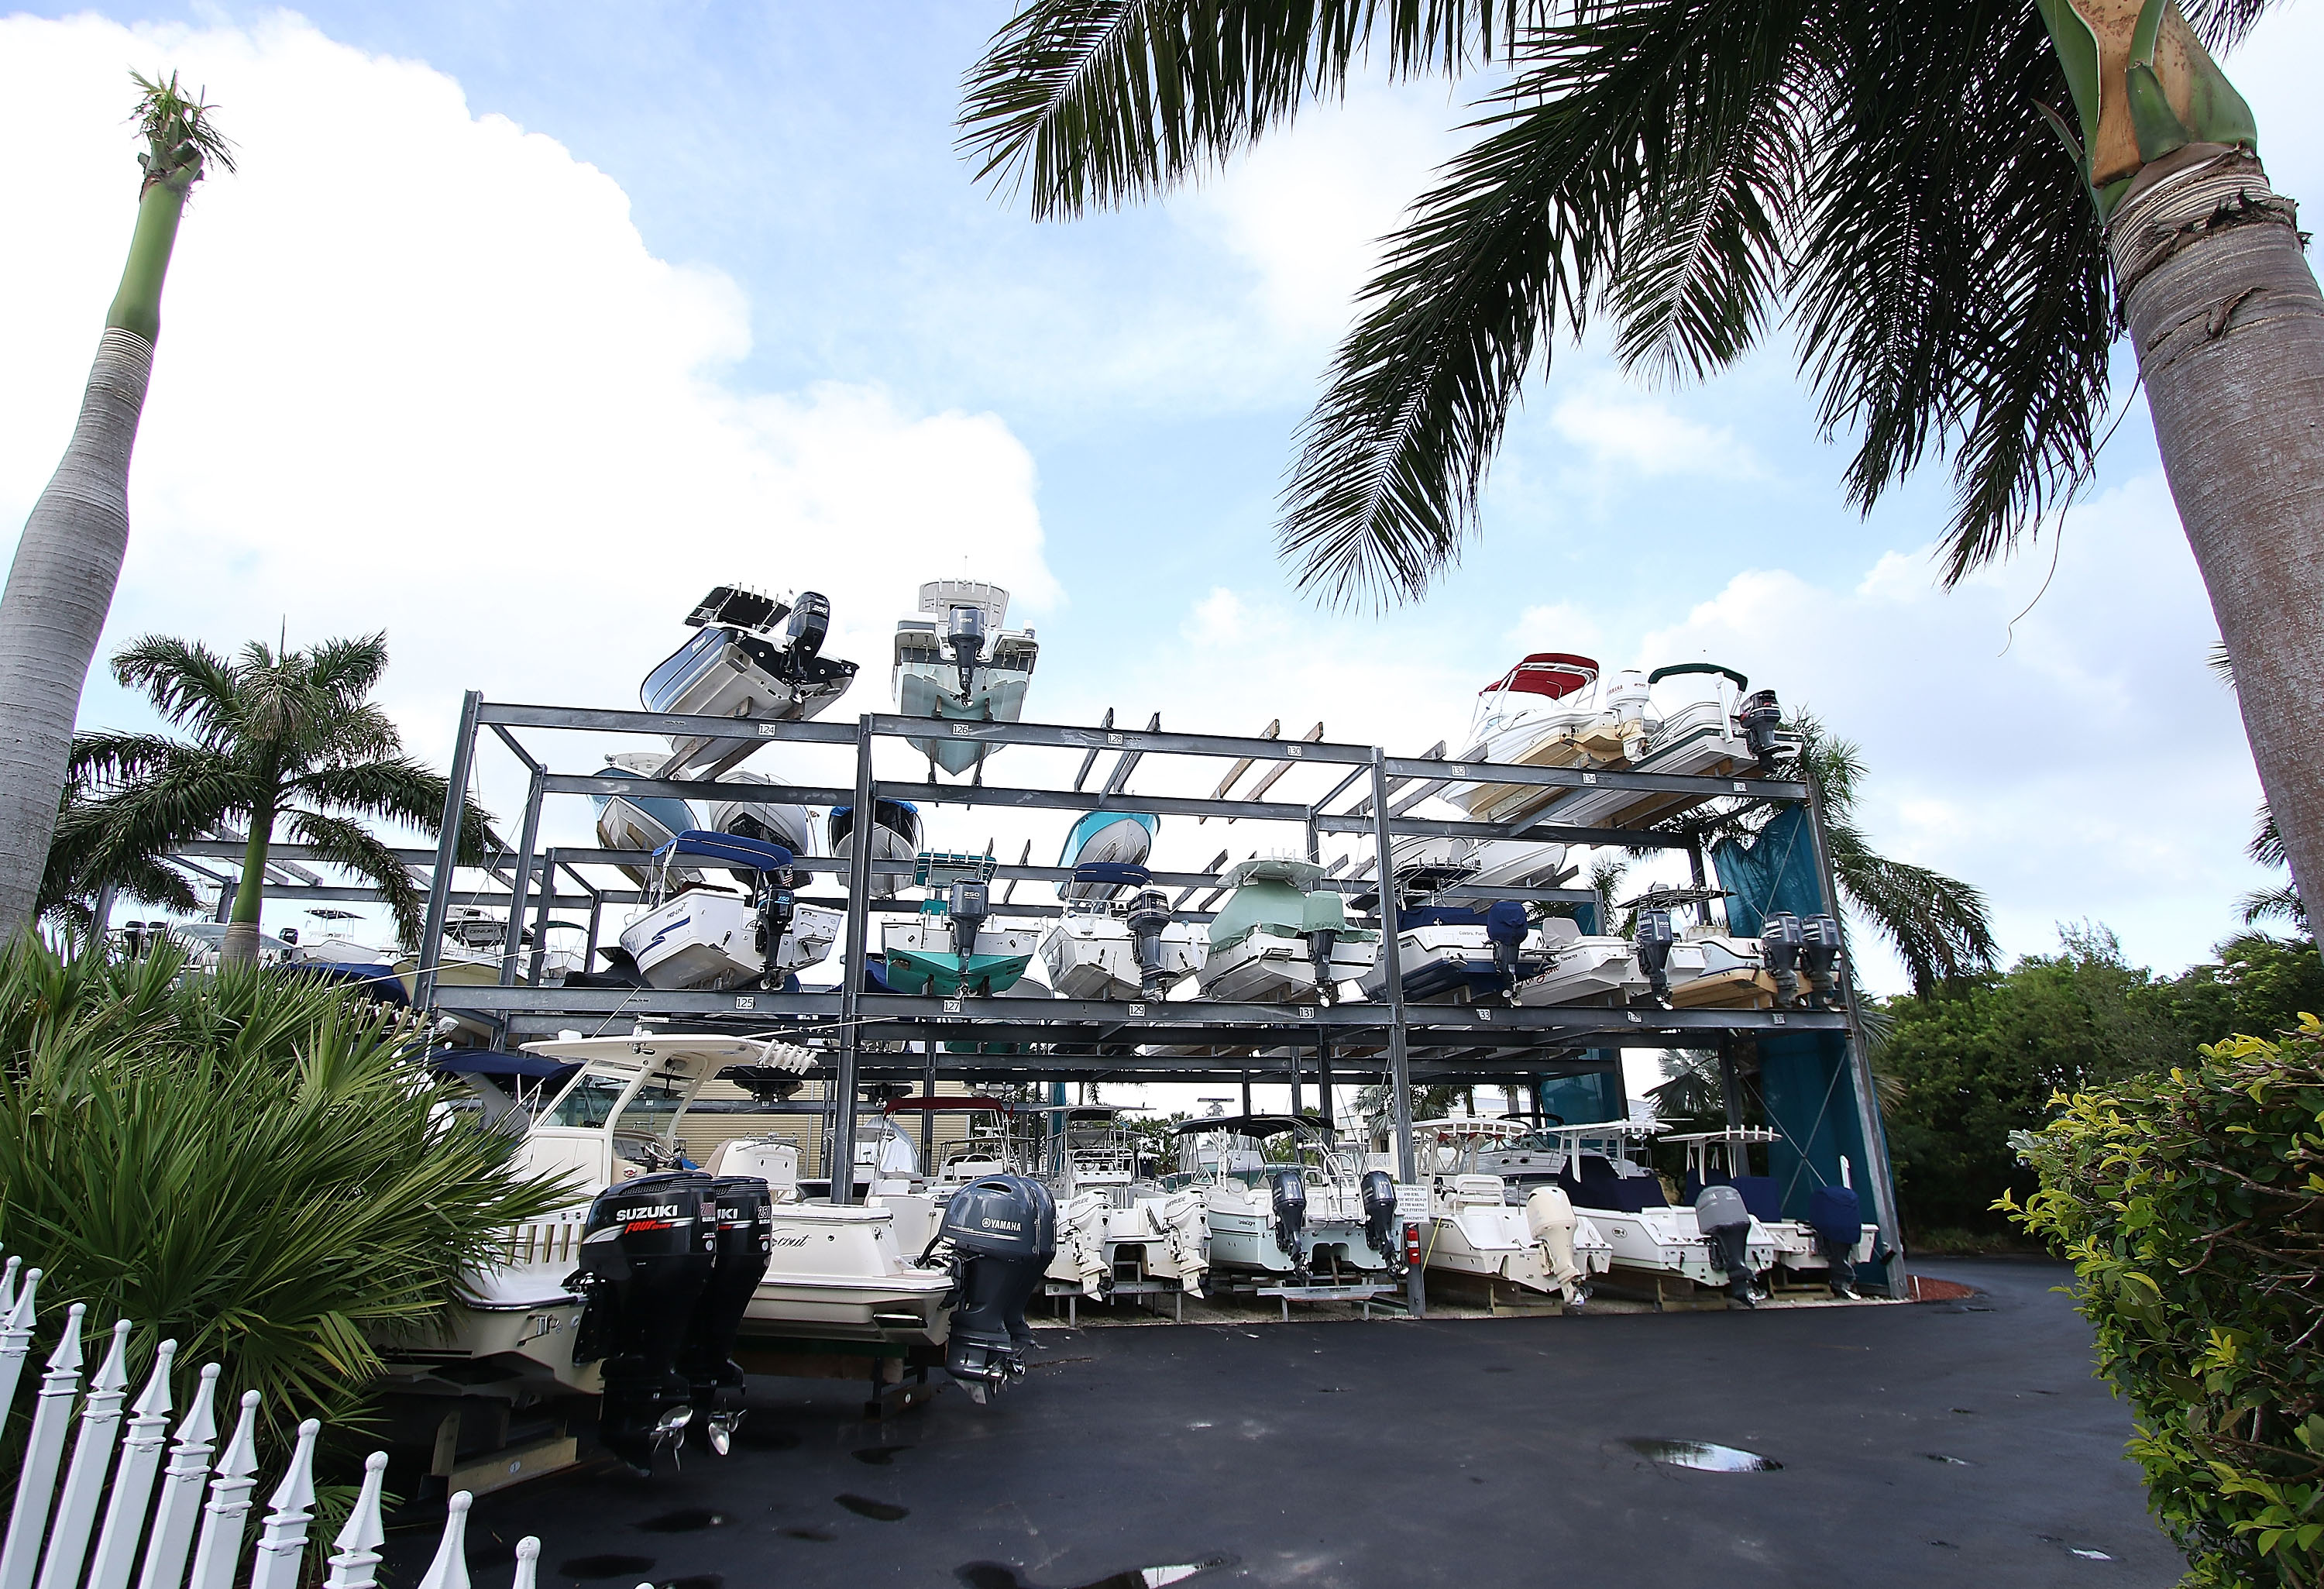 Boats in storage at a marina in the Florida Keys on September 8, 2017 in Islamorada, Florida The entire Florida Keys are under a mandatory evacuation notice as Hurricane Irma approaches the low-lying chain of islands south of Miami. (Marc Serota—Getty Images)